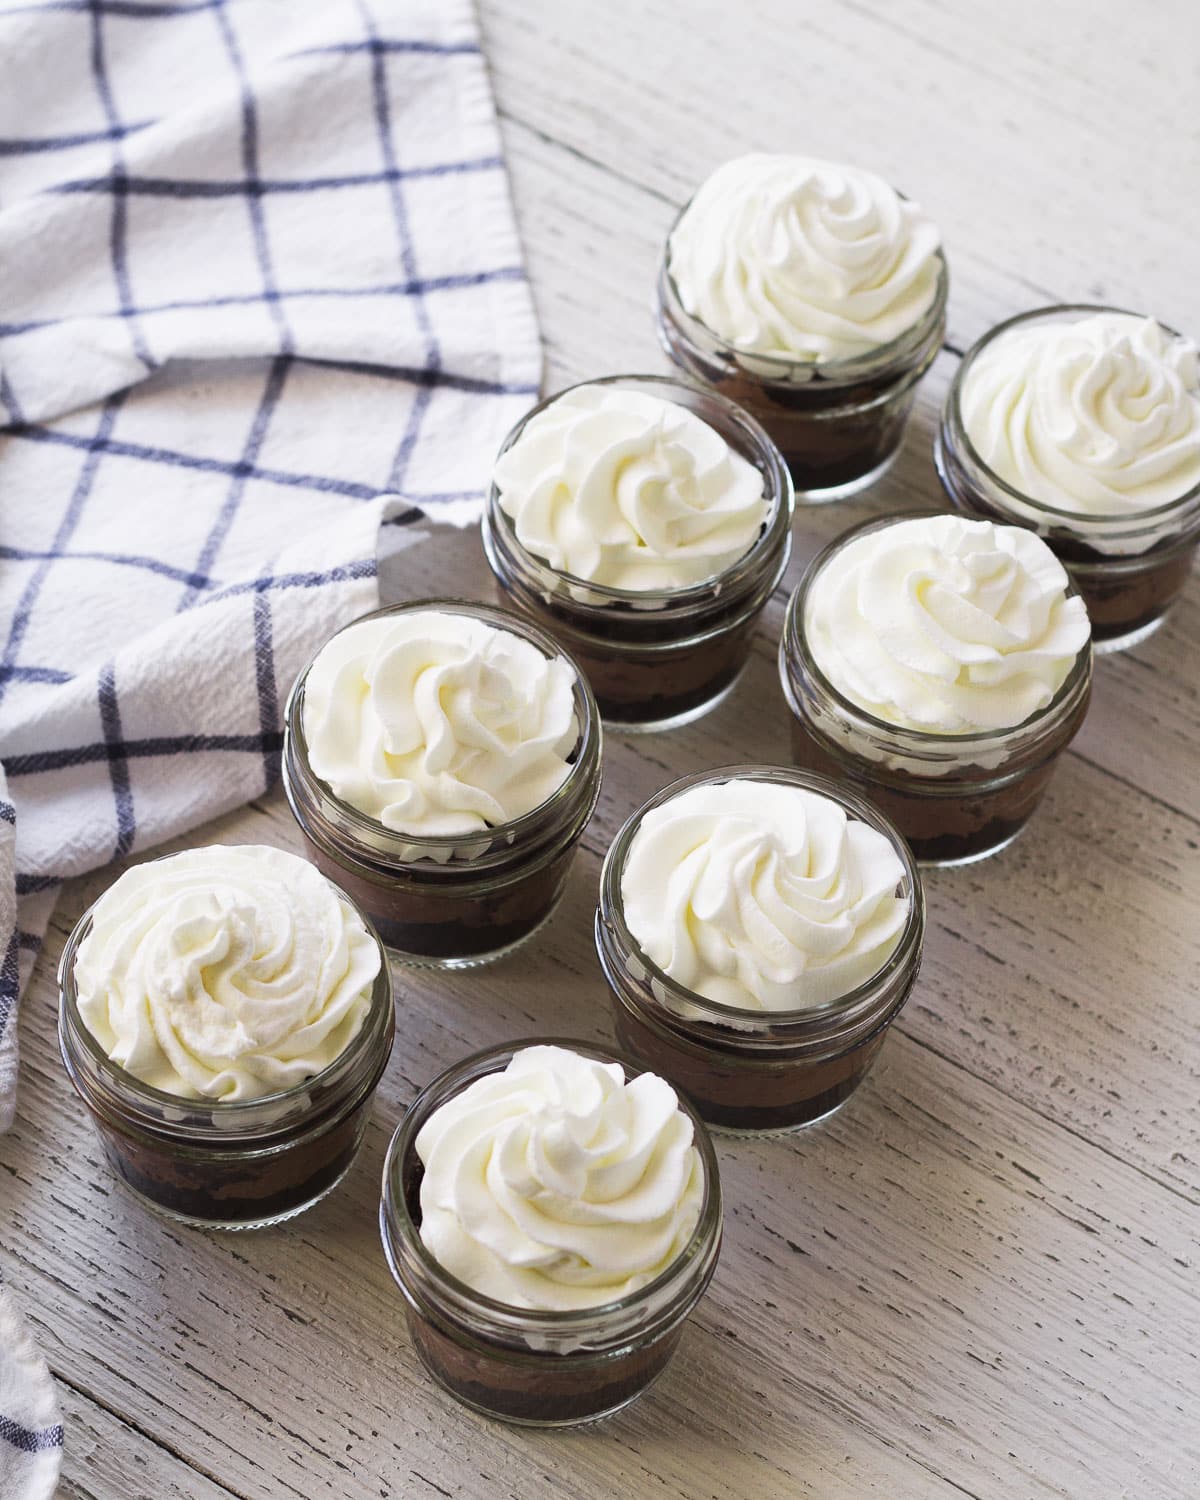 Eight mason jars filled with chocolate layers and topped with whipped cream.